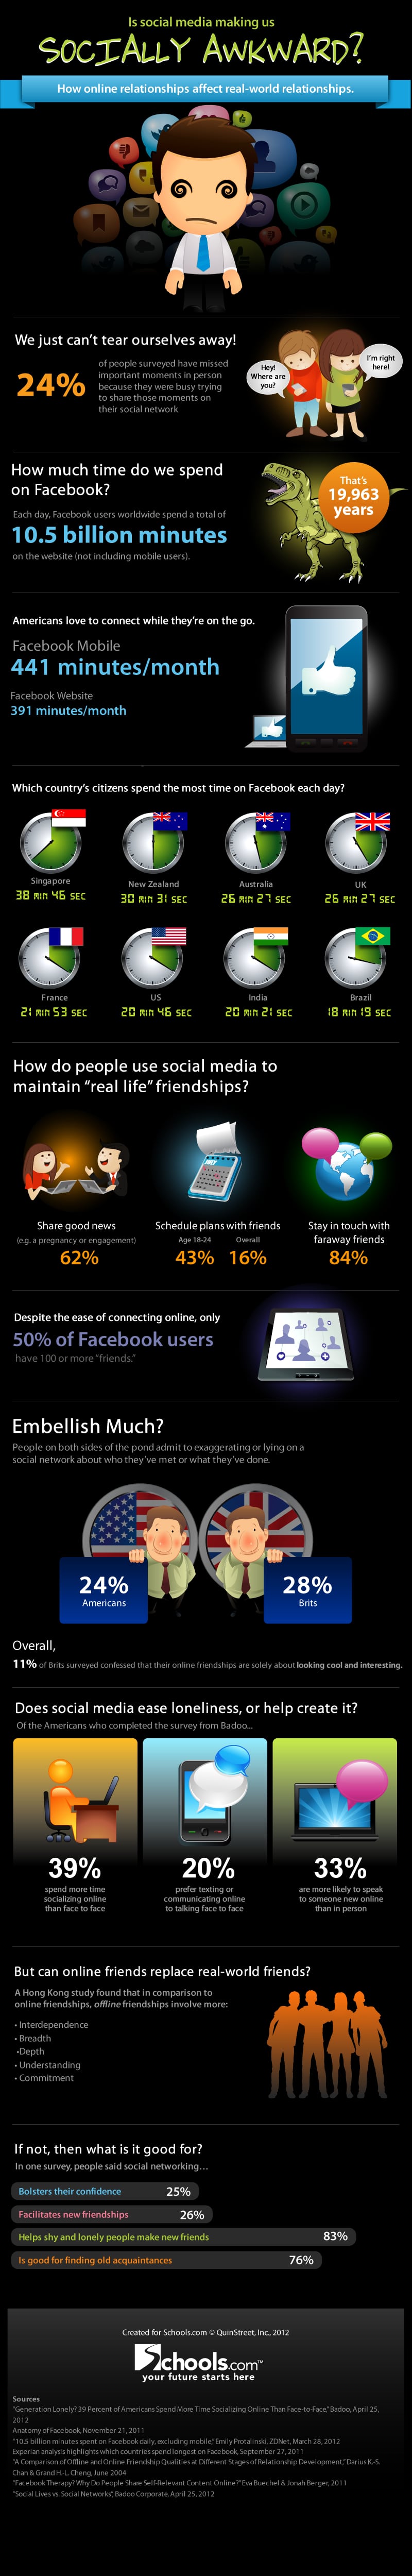 How Social Media Is Making Us Awkward [Infographic]